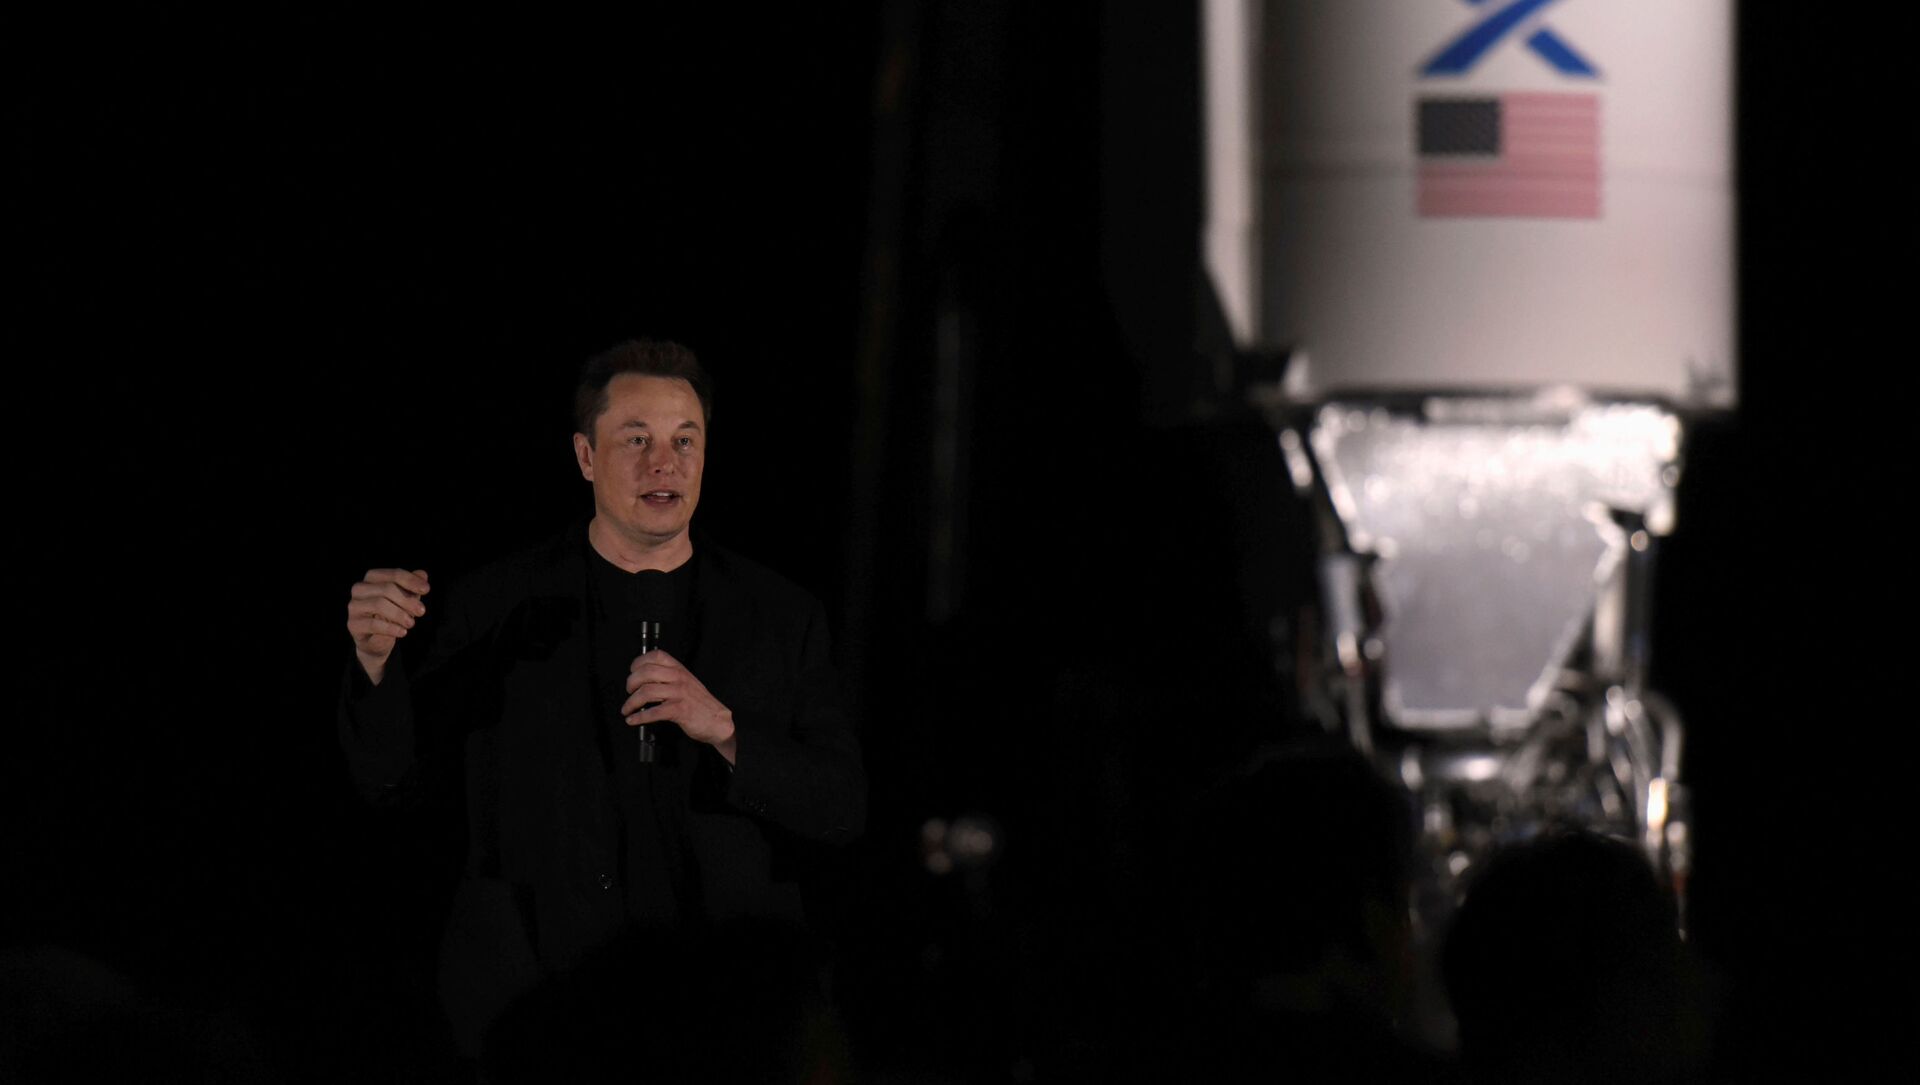 FILE PHOTO: SpaceX's Elon Musk gives an update on the company's Mars rocket Starship in Boca Chica, Texas U.S. September 28, 2019. REUTERS/Callaghan O'Hare/File Photo - Sputnik International, 1920, 04.08.2021